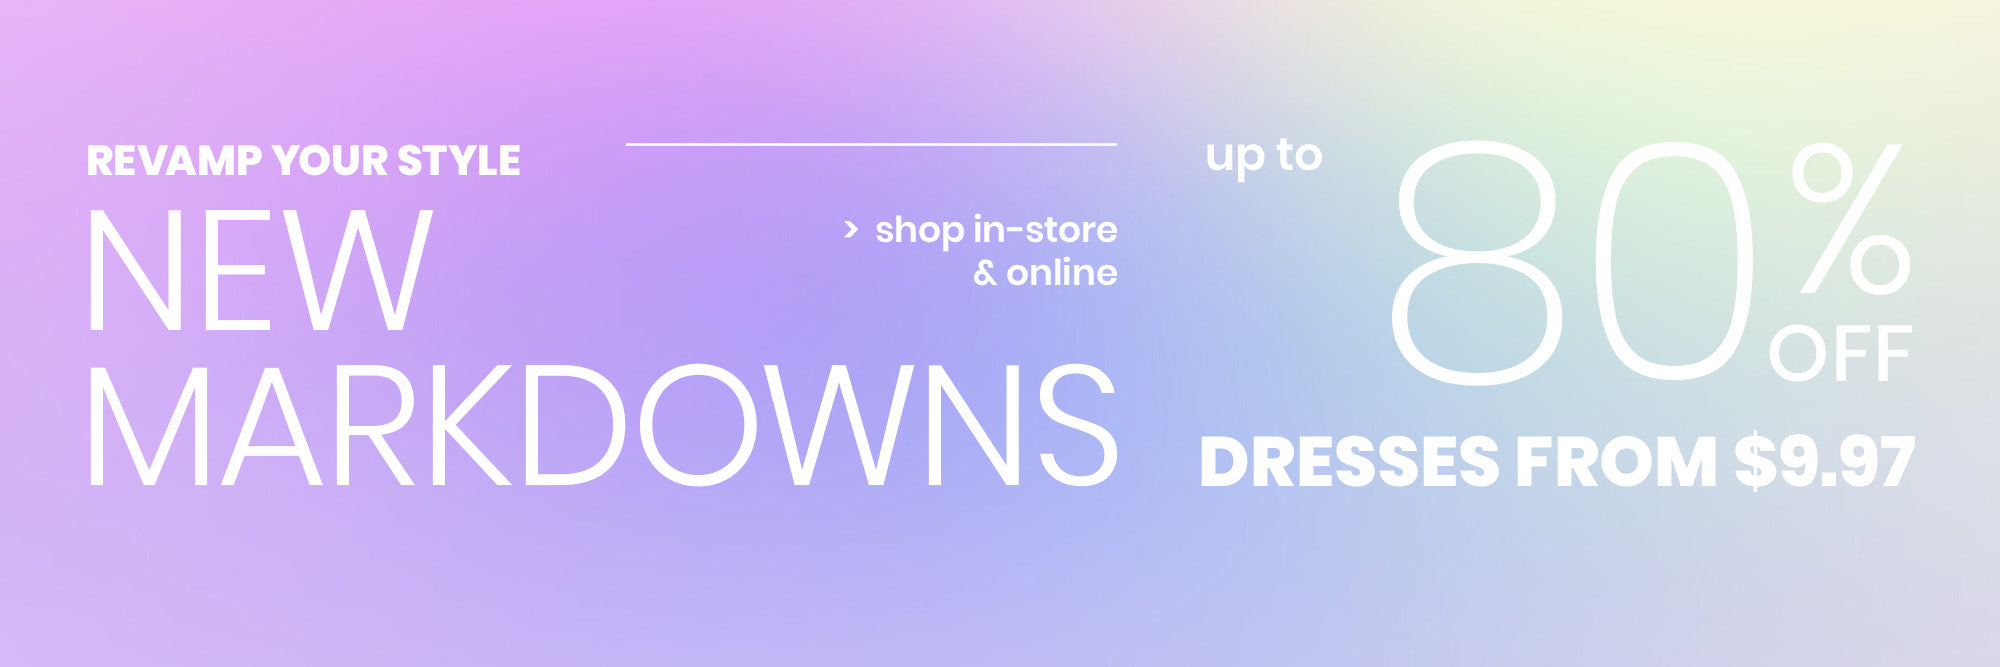 Shop new markdowns and get up to 80% off on women's clothing and Windsor fashions online or in-store including dresses, trendy tops, jeans, skirts, shorts, sandals, jewelry, & everything you need to create new looks affordably!